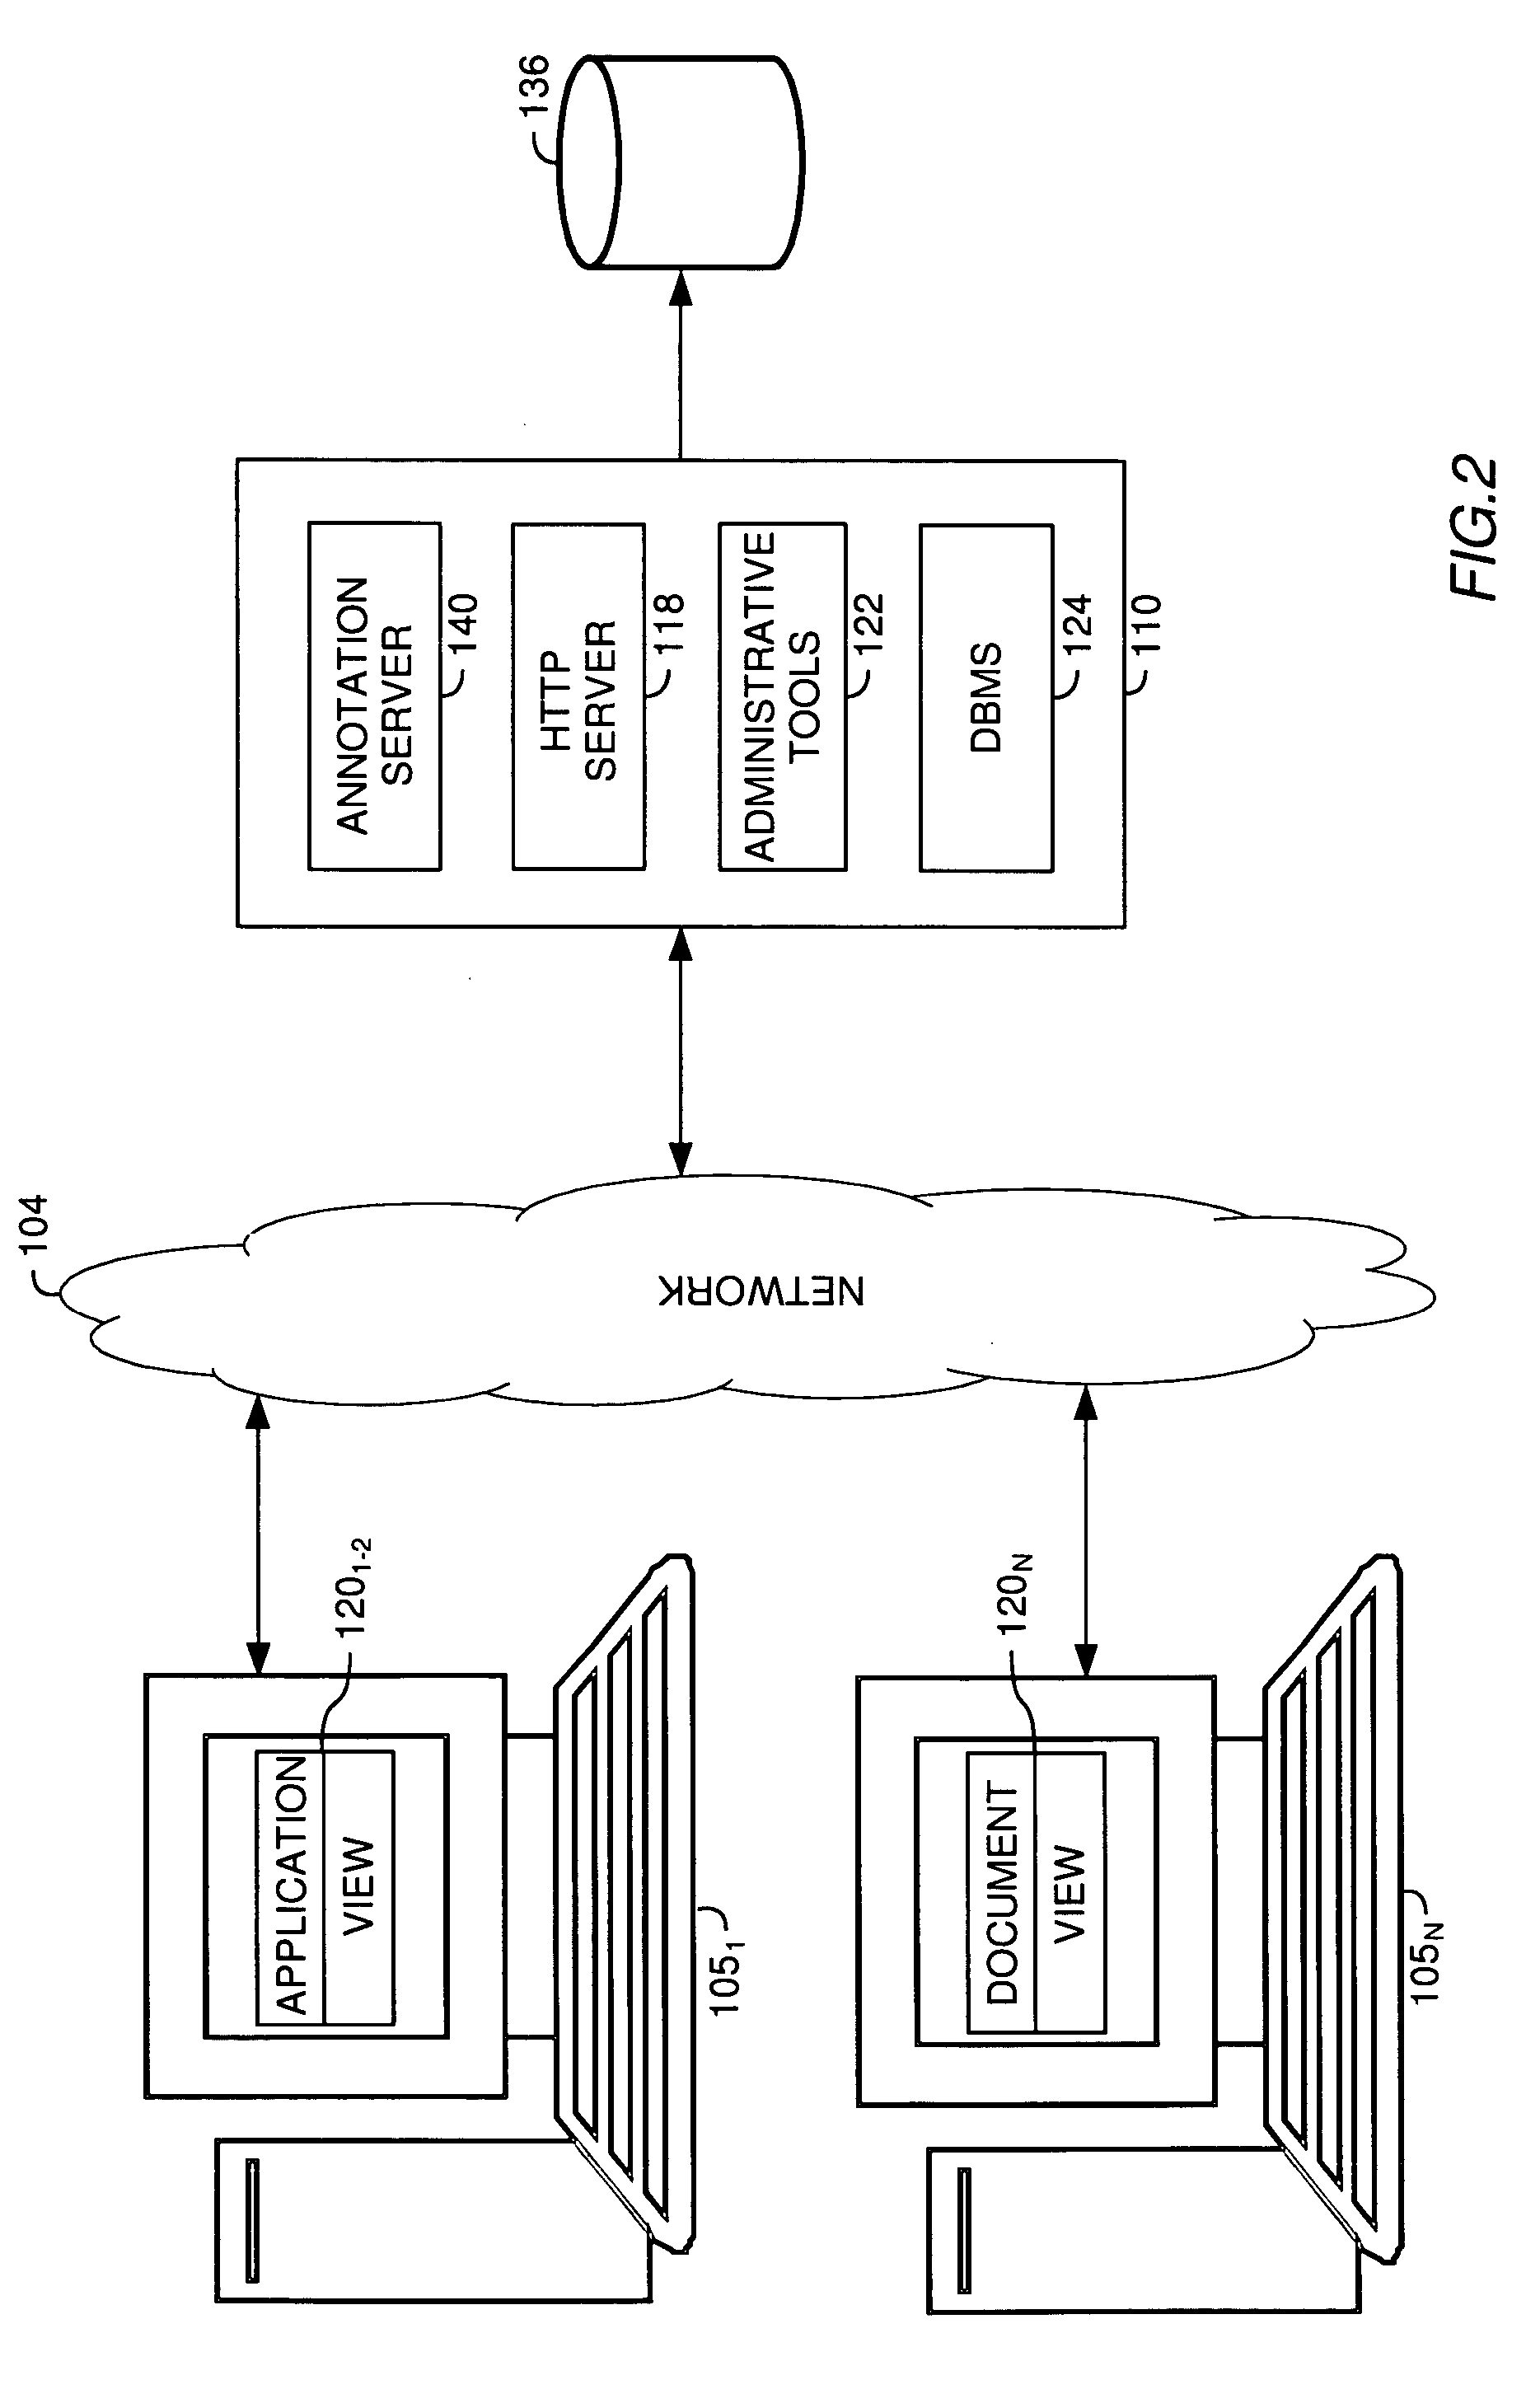 Method for associating annotations with document families